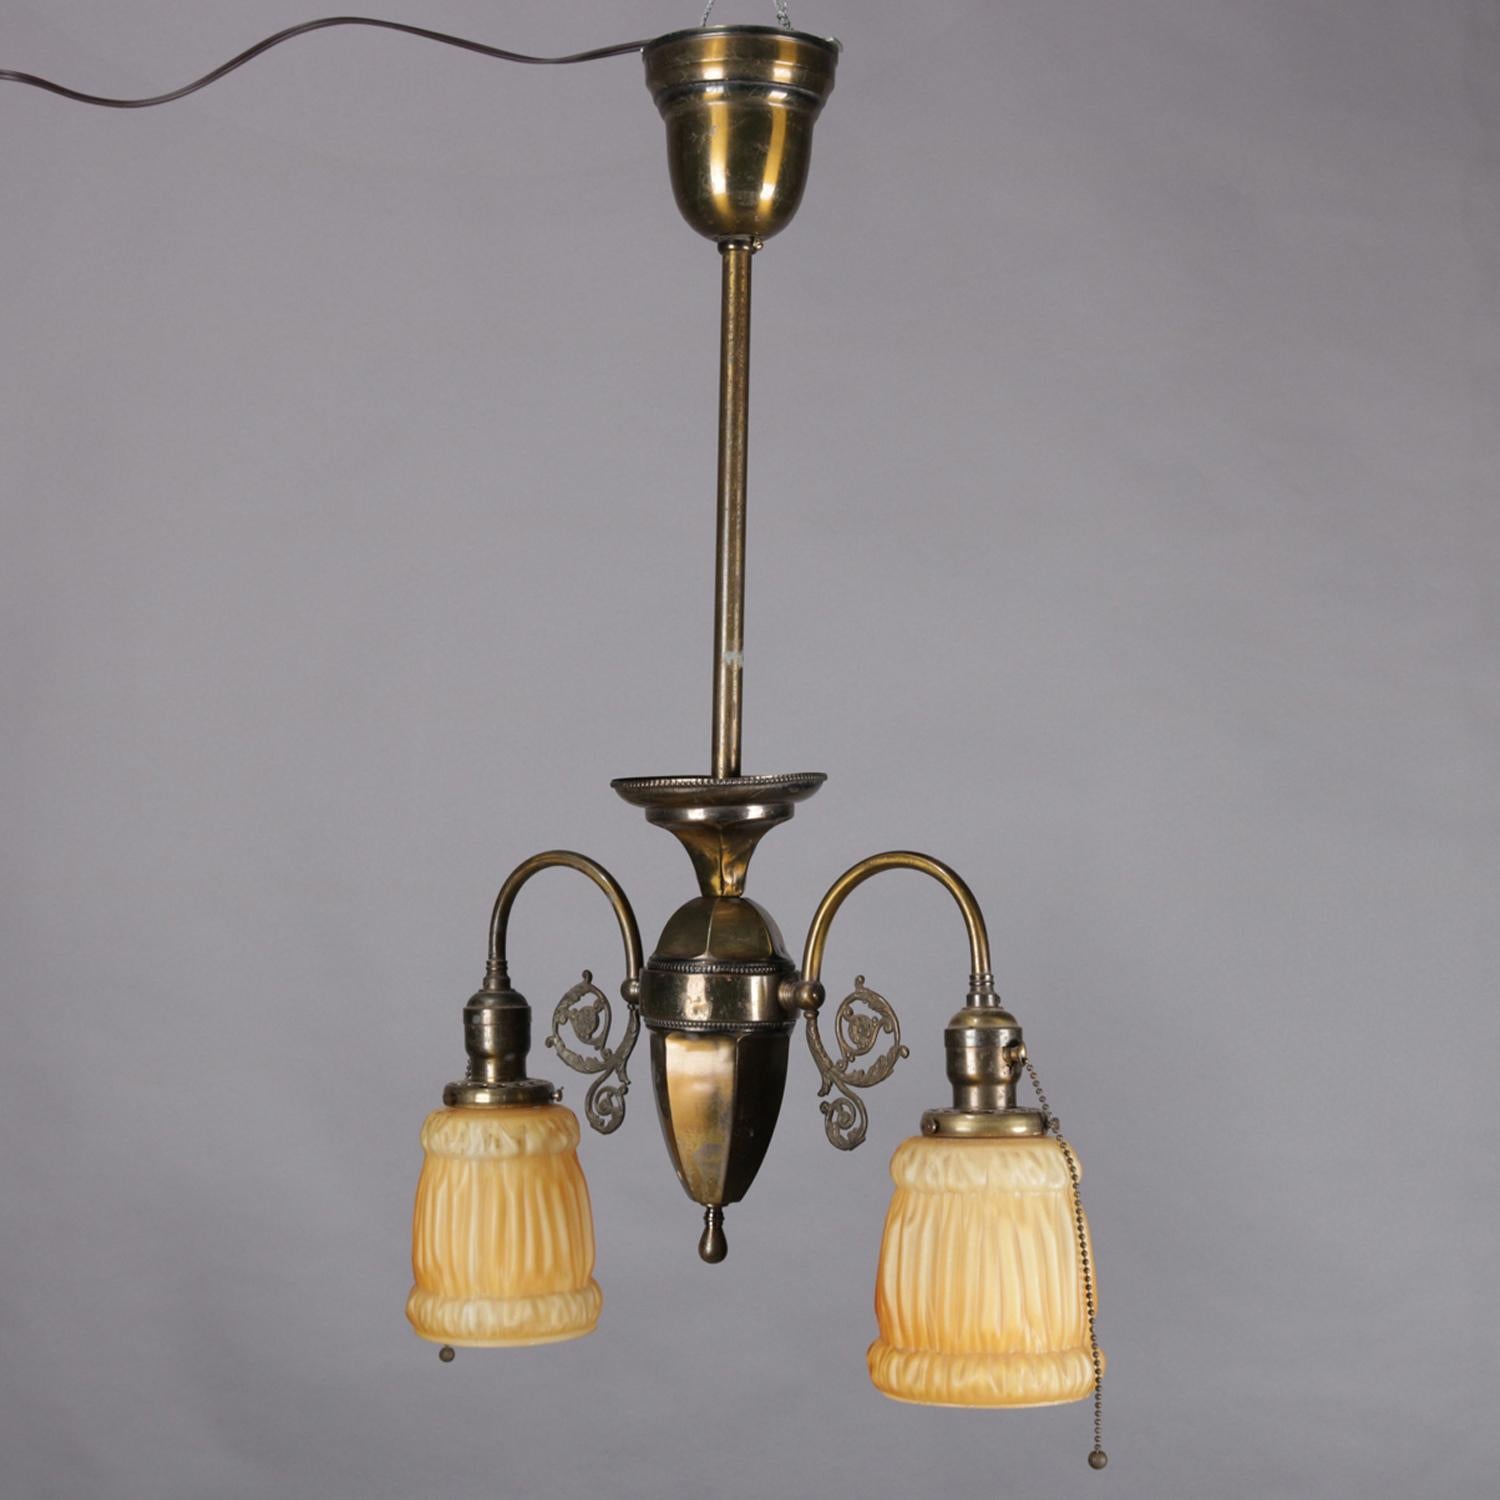 An antique drop light chandelier features brass frame with central faceted pendant having two scroll form arms terminating in lights with frosted glass shades, circa 1920

Measures: 27